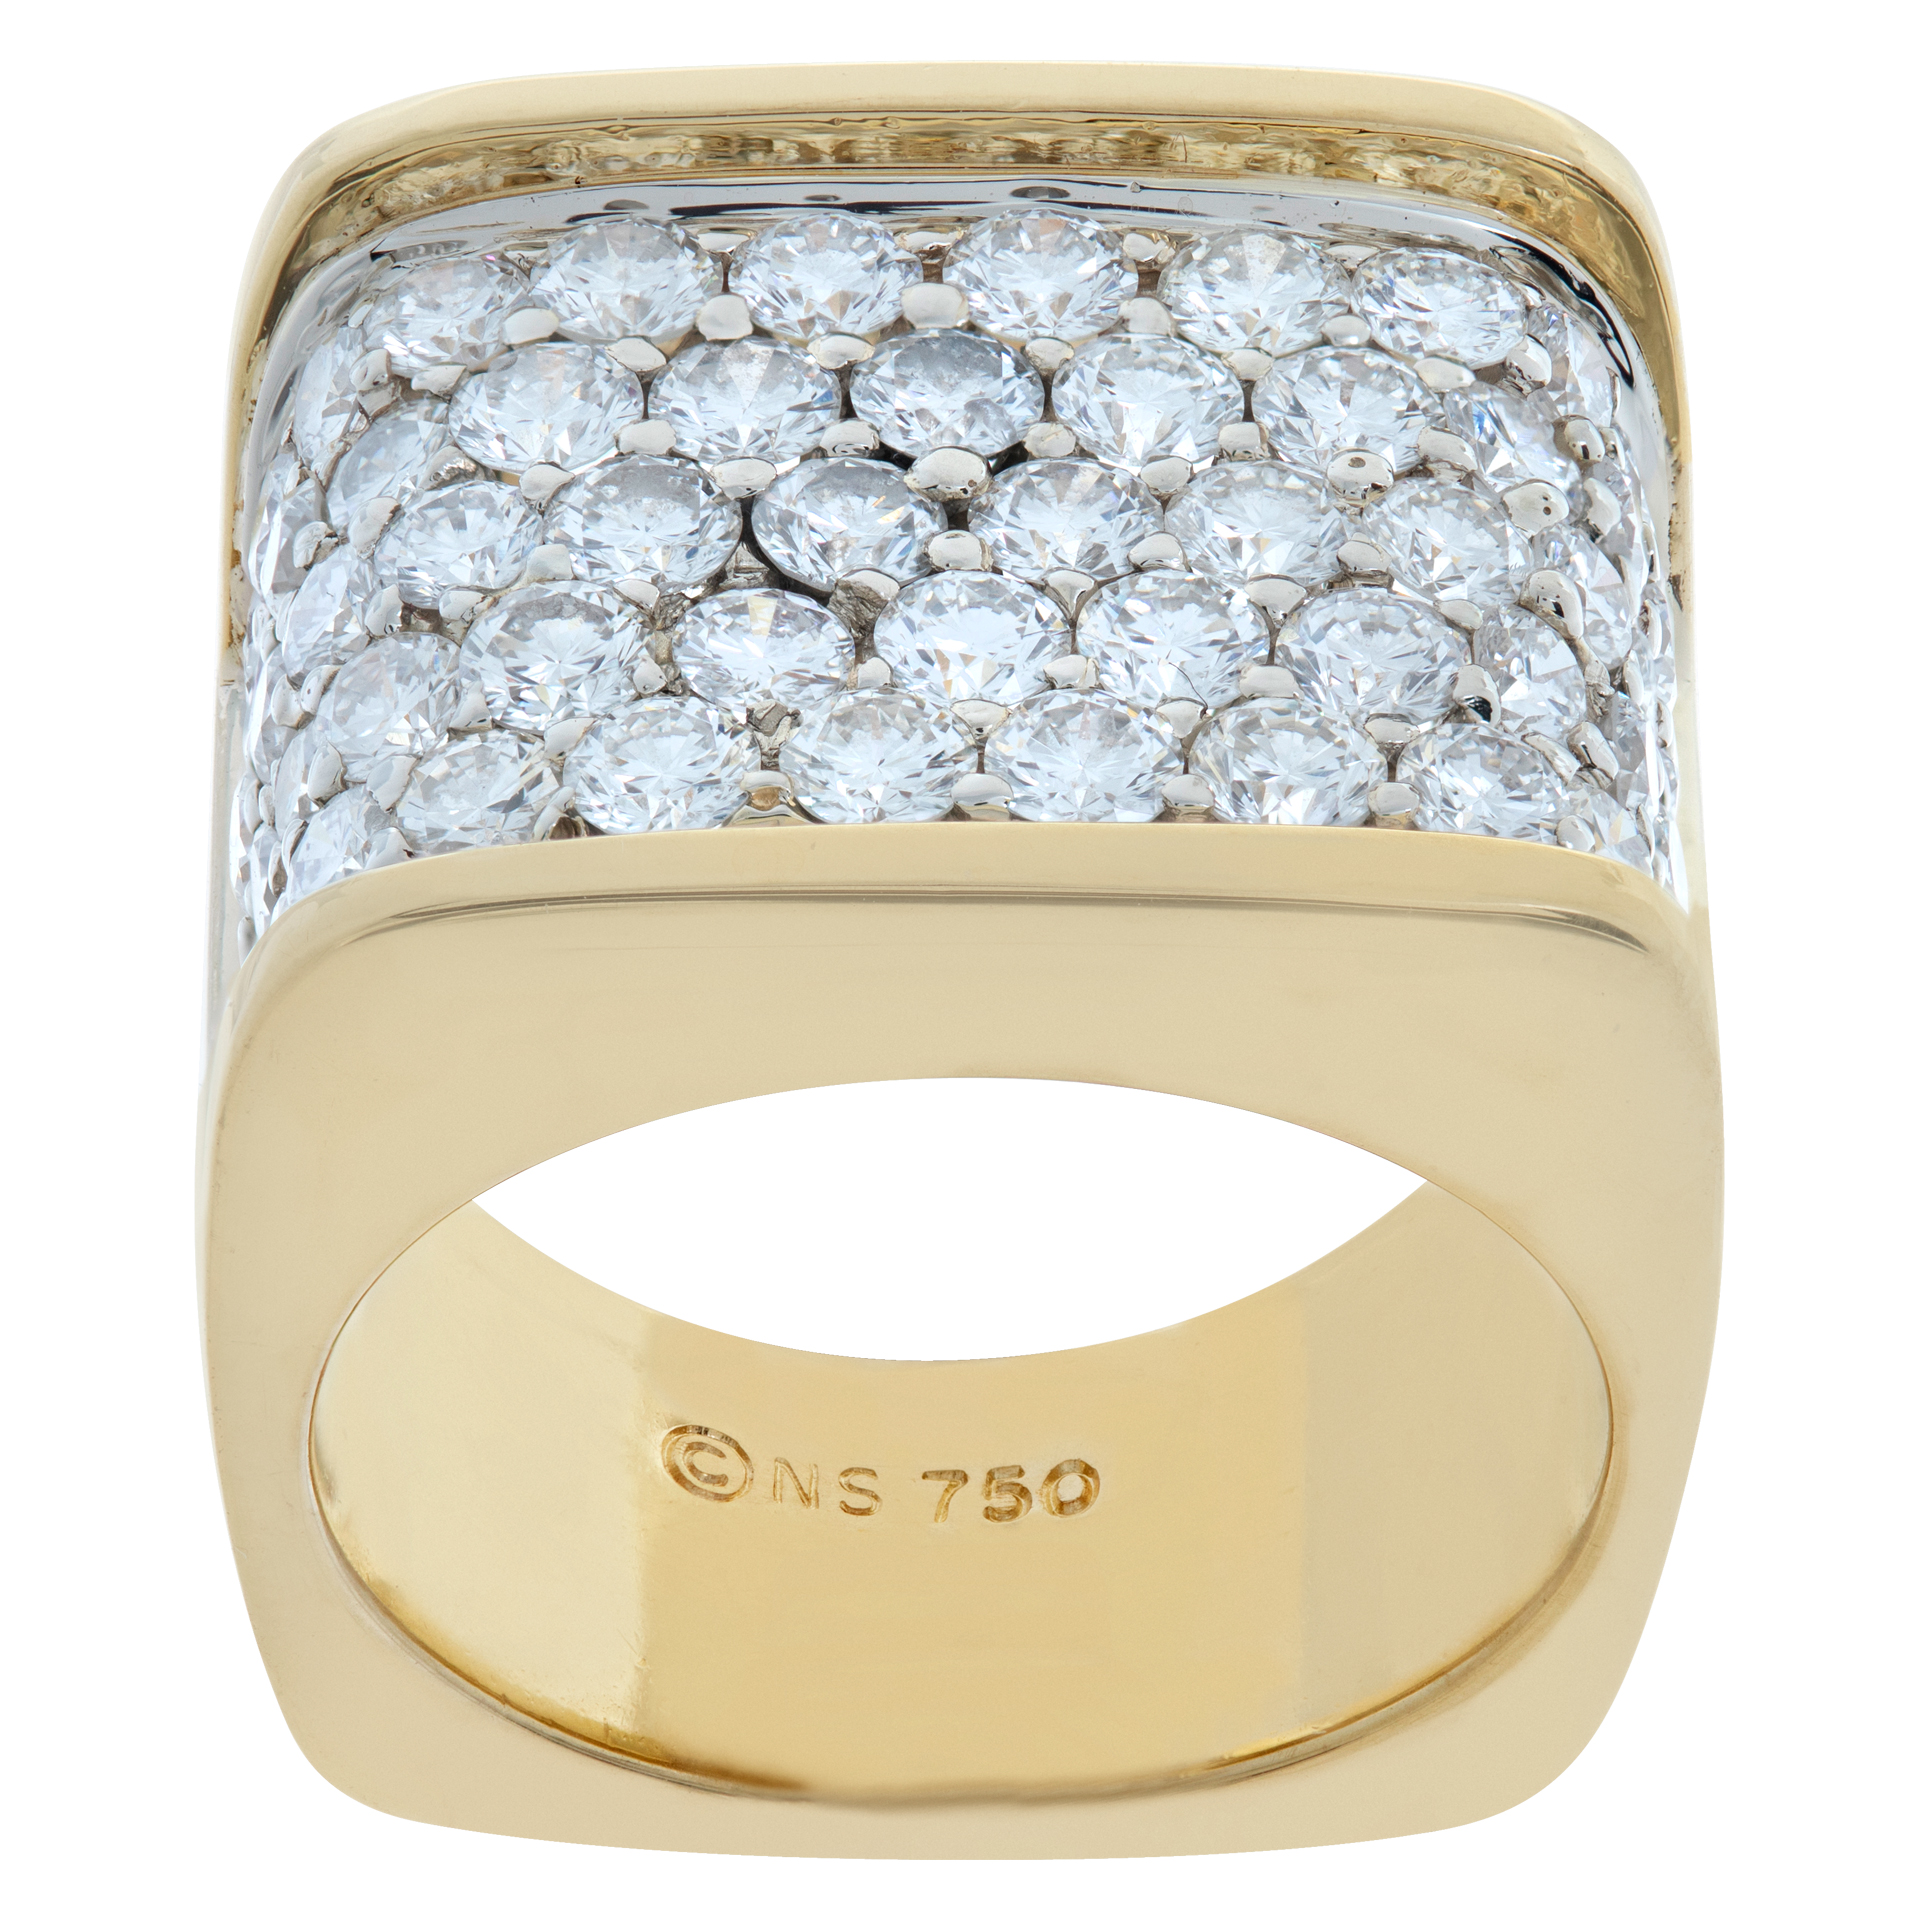 Pave square top diamond ring with approx 4 cts of H-I color VS2 clarity